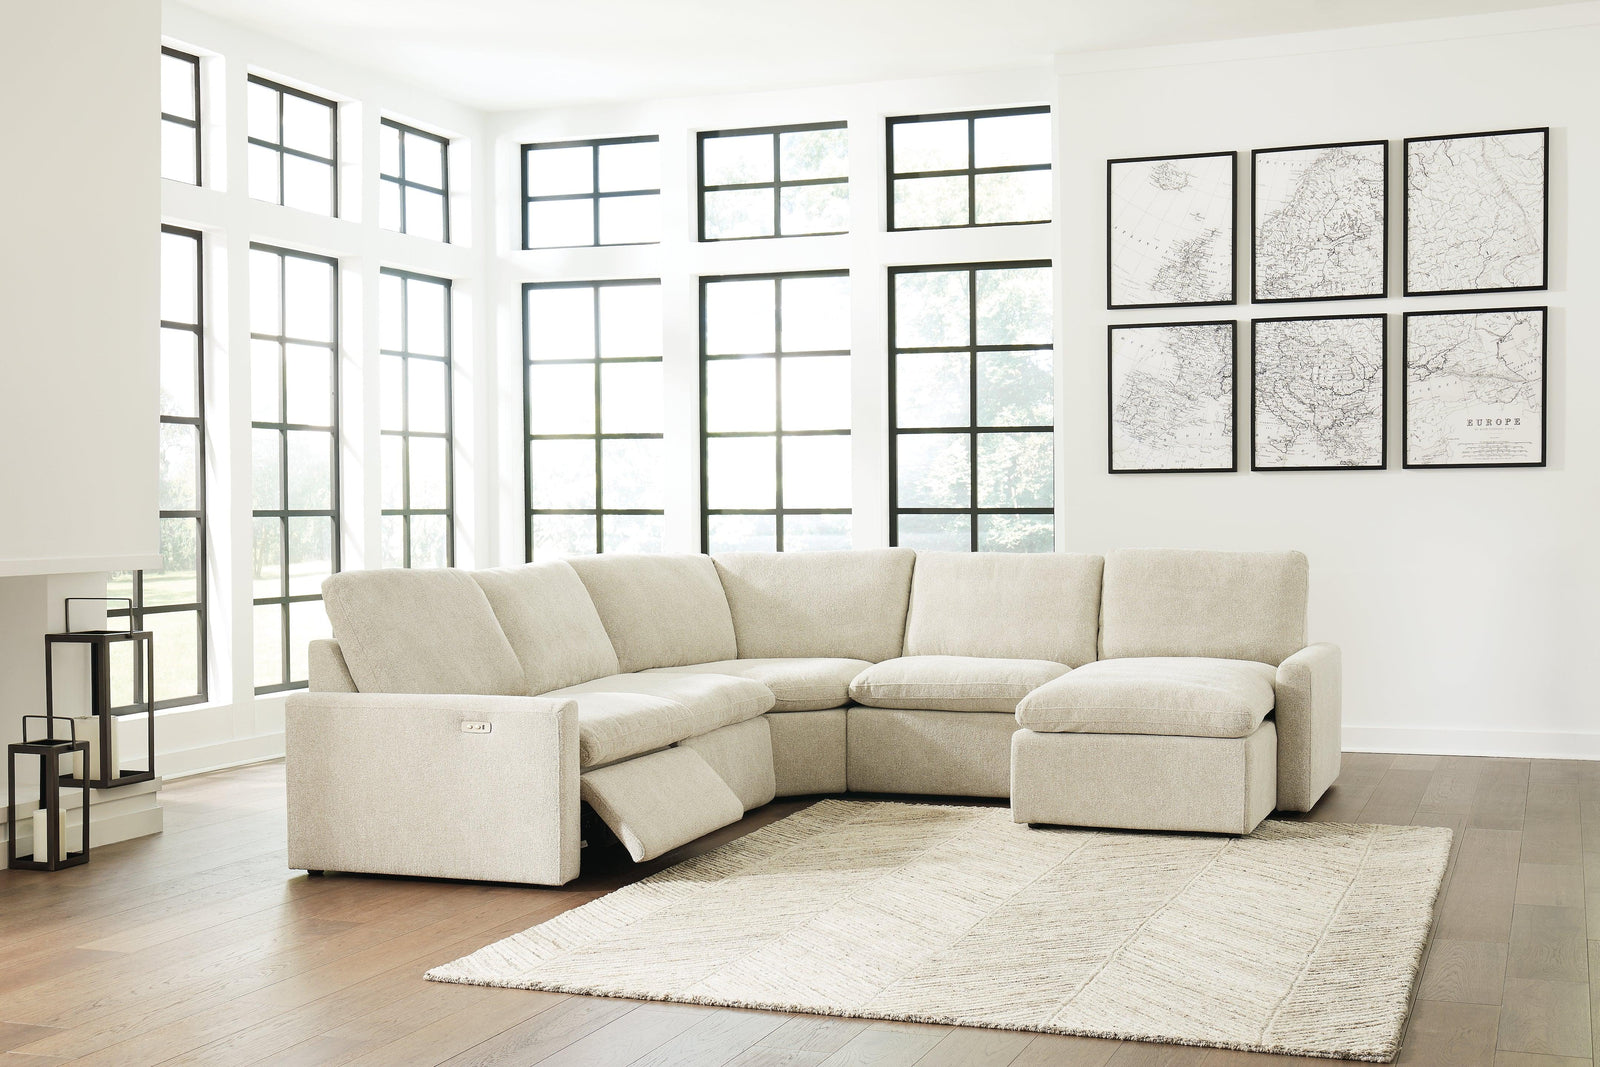 Hartsdale Linen 5-Piece Right Arm Facing Reclining Sectional With Chaise - Ella Furniture